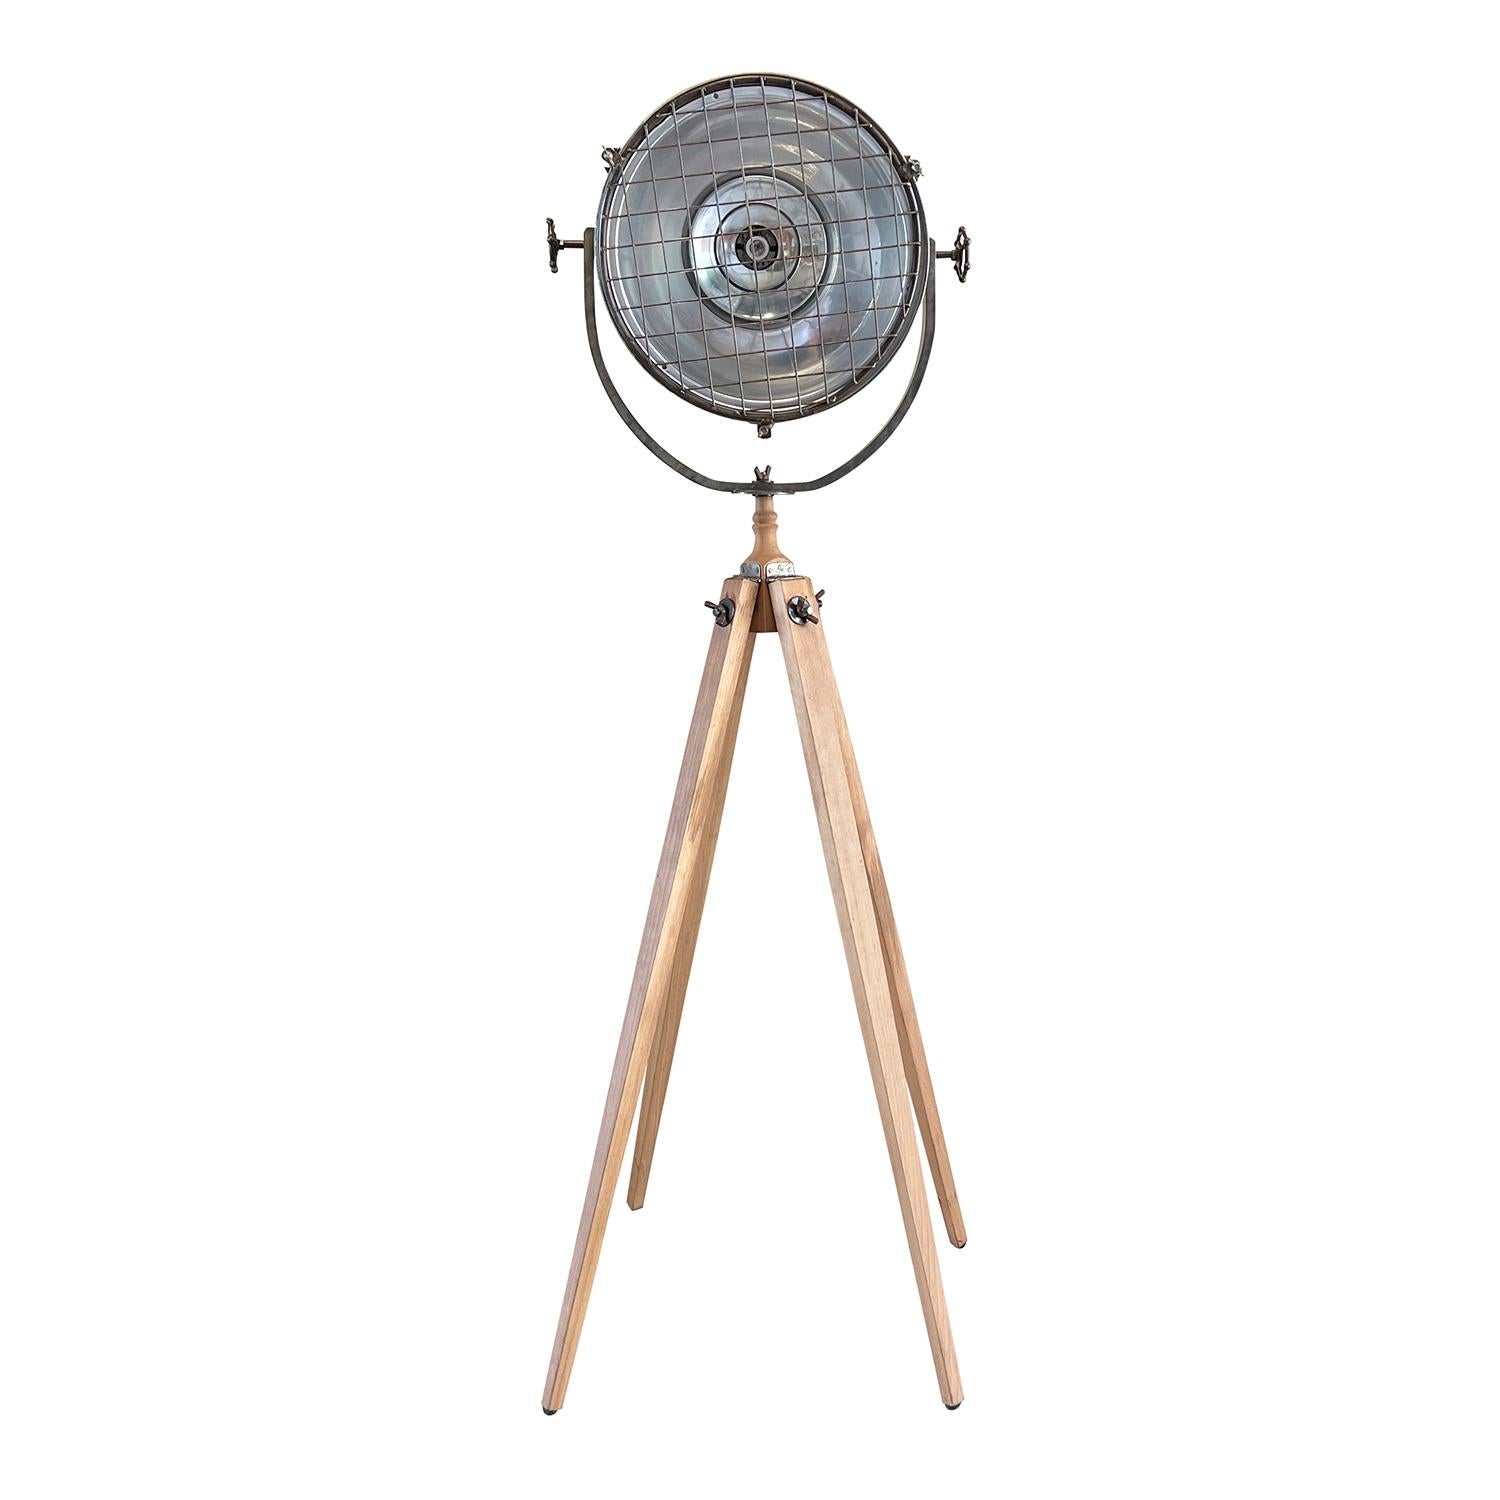 A vintage Industrial style Italian spotlight made of hand crafted metal, in good condition. The detailed theater floor studio lamp is composed with a large adjustable shade, featuring a single light socket, consisting its original hardware, standing